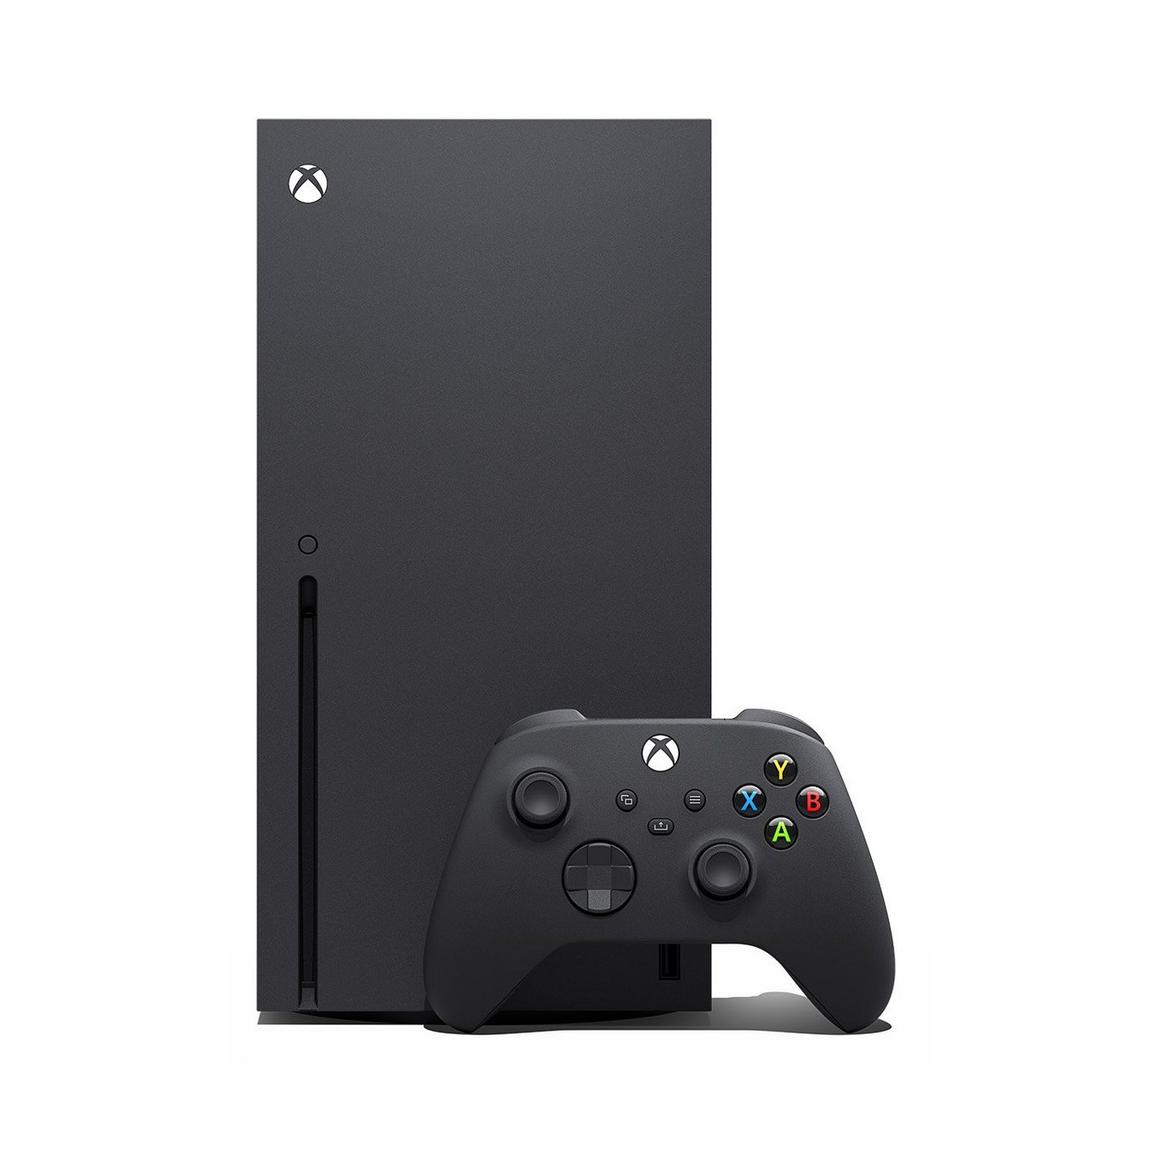 A black Microsoft Xbox Series X Console with a black controller on a white background